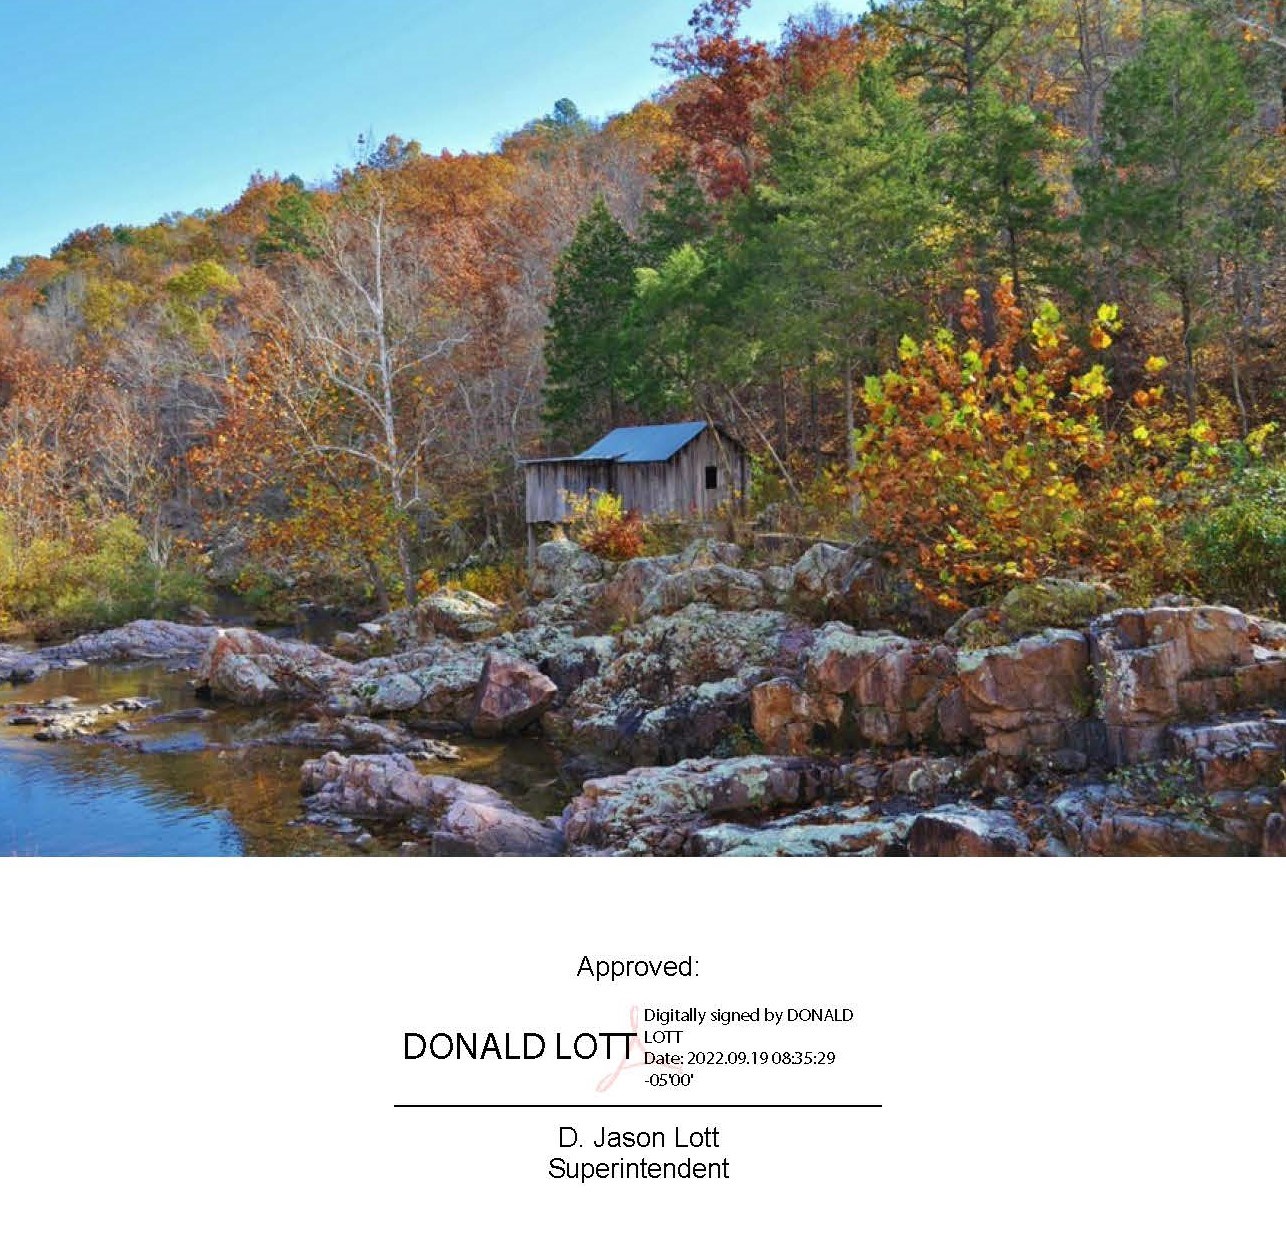 A picture of Klepzig Mill, an old wooden mill sits on a small bluff overlooking a creek surrounded by fall foliage. Text is the signature of the Park Superintendent Jason Lott on September 19, 2022.